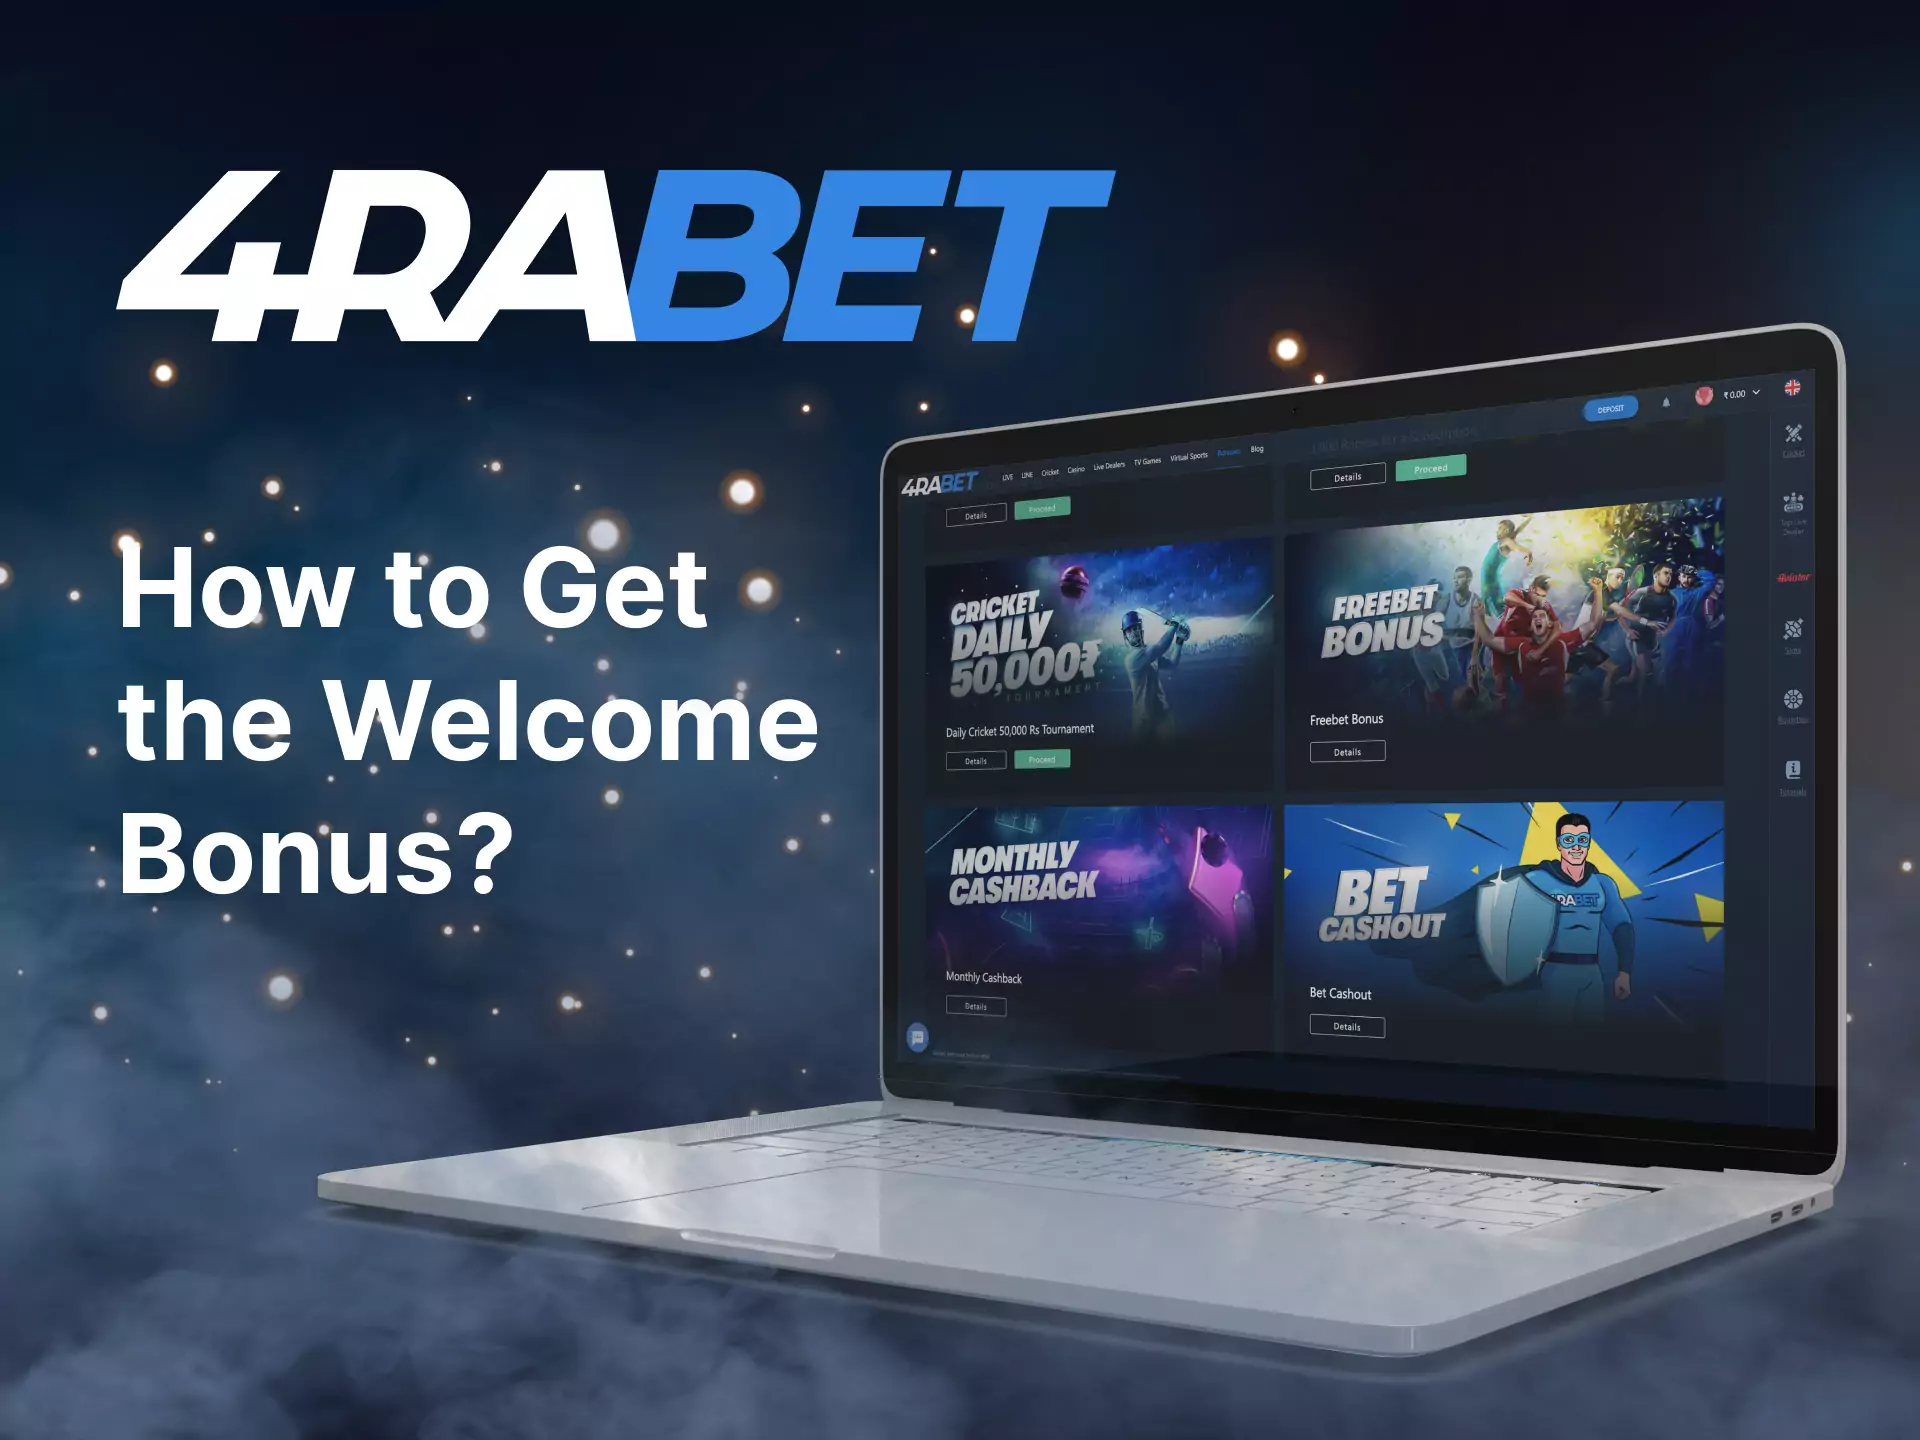 In this guide, learn all the ways to get a special welcome bonus from 4rabet.